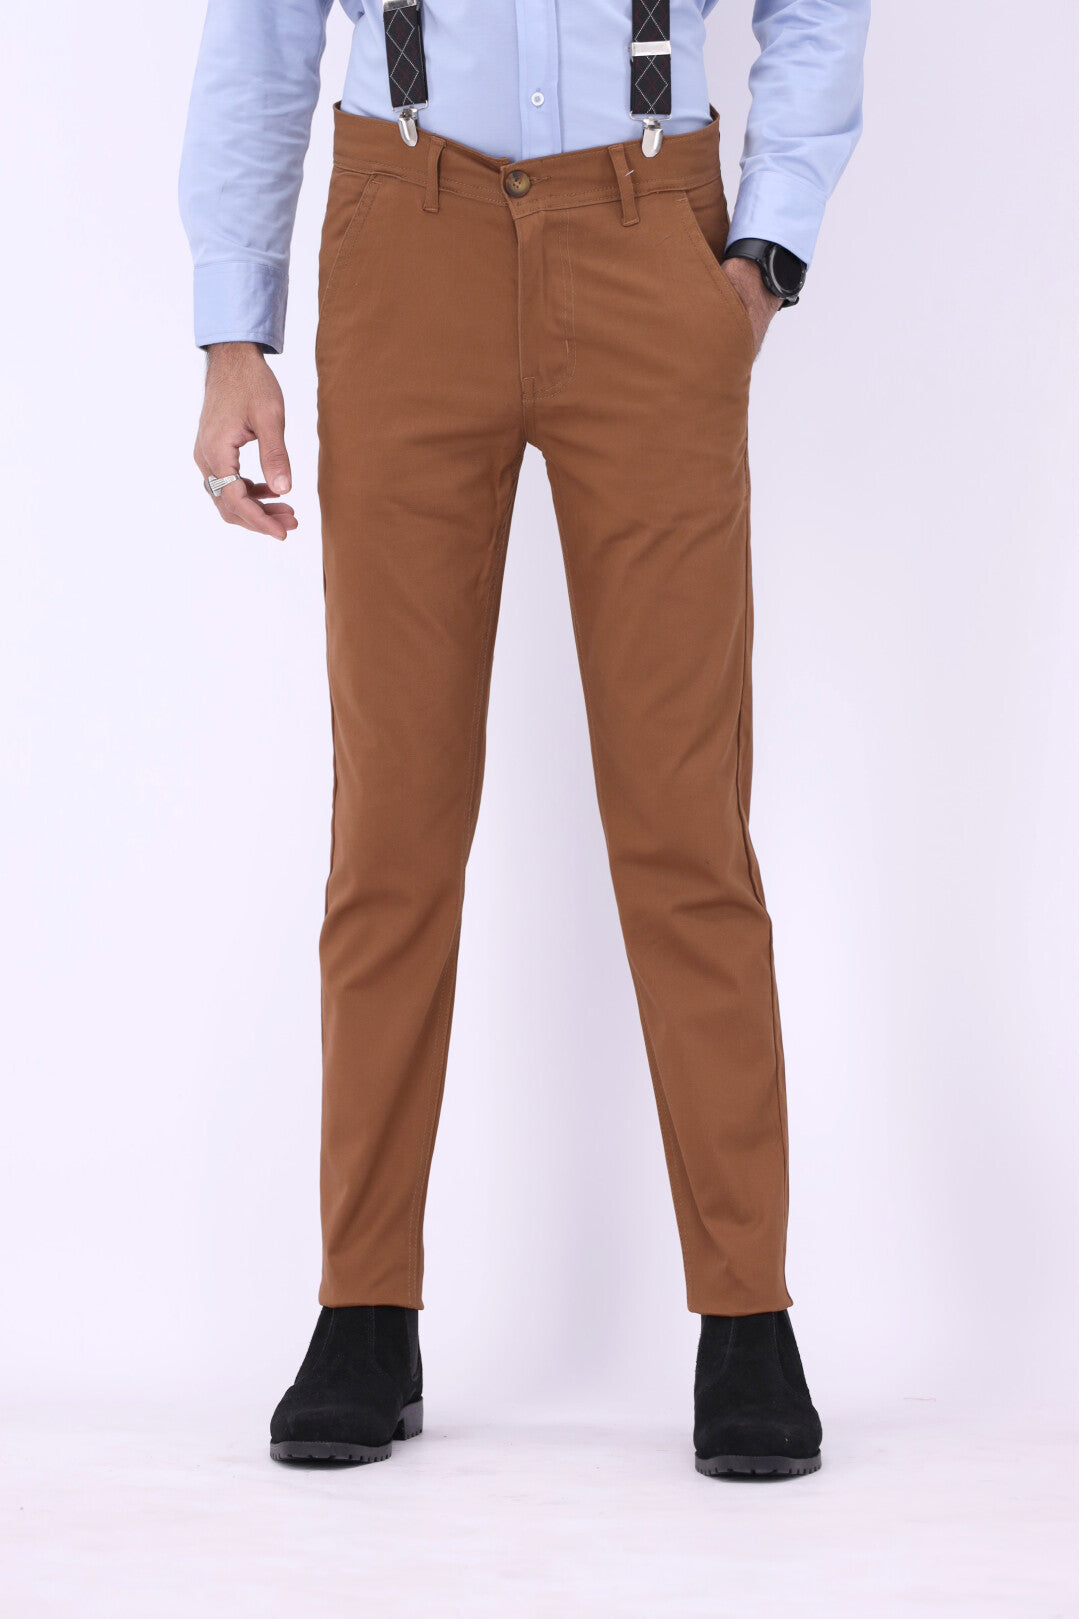 FT Cotton Chinos Pant - Otter Brown